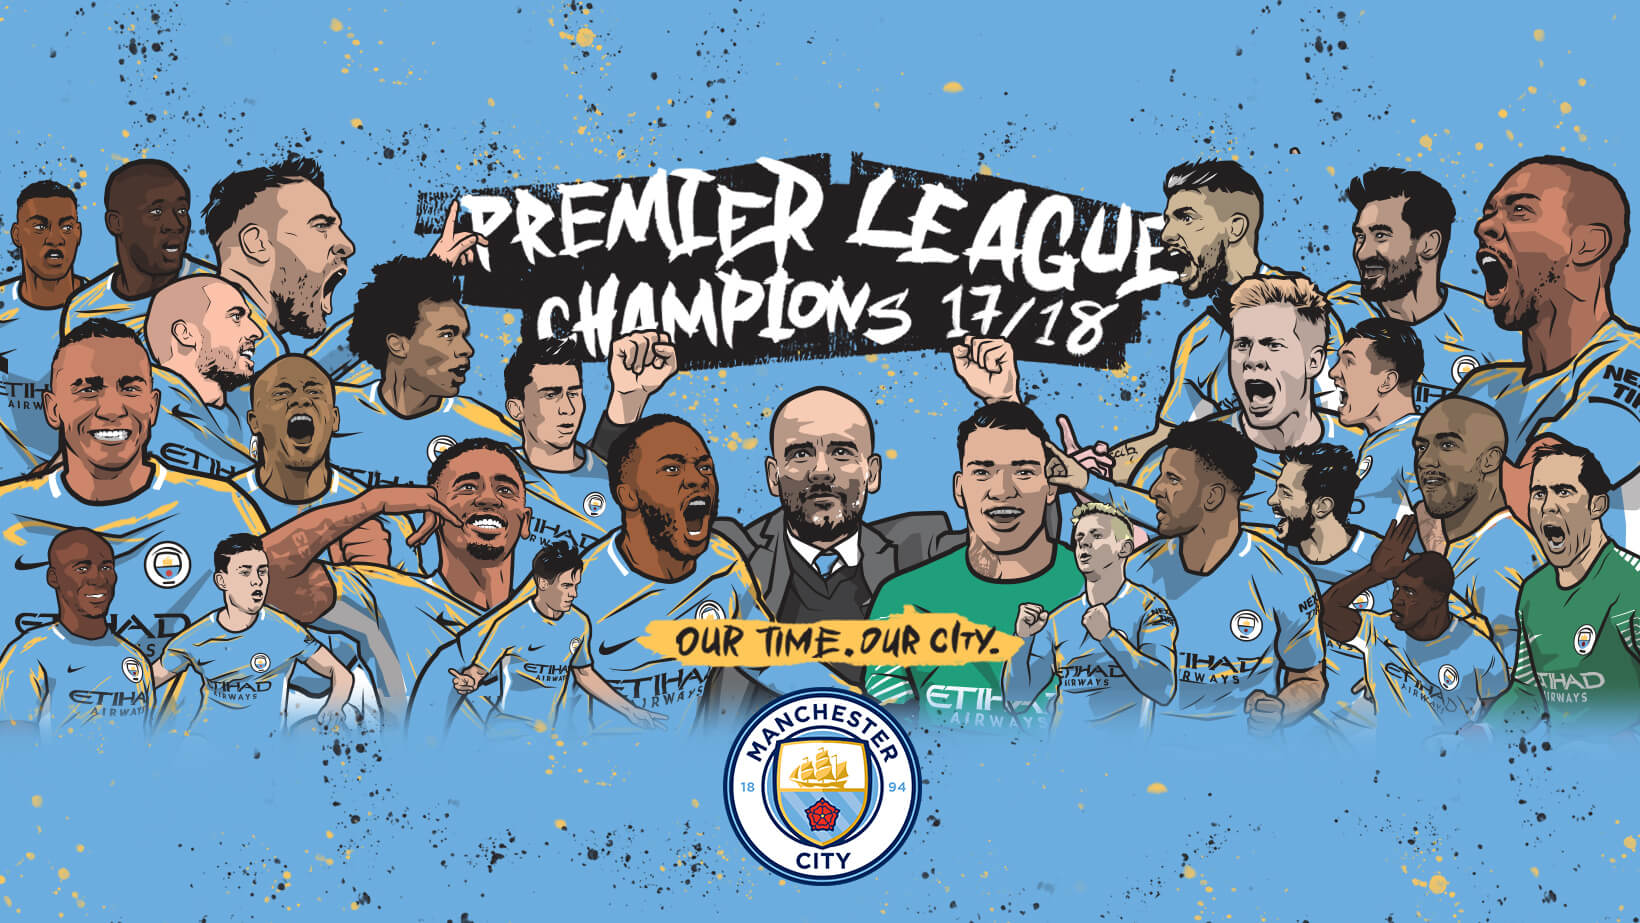 Champions League: Manchester City FC by Z A Y N O S